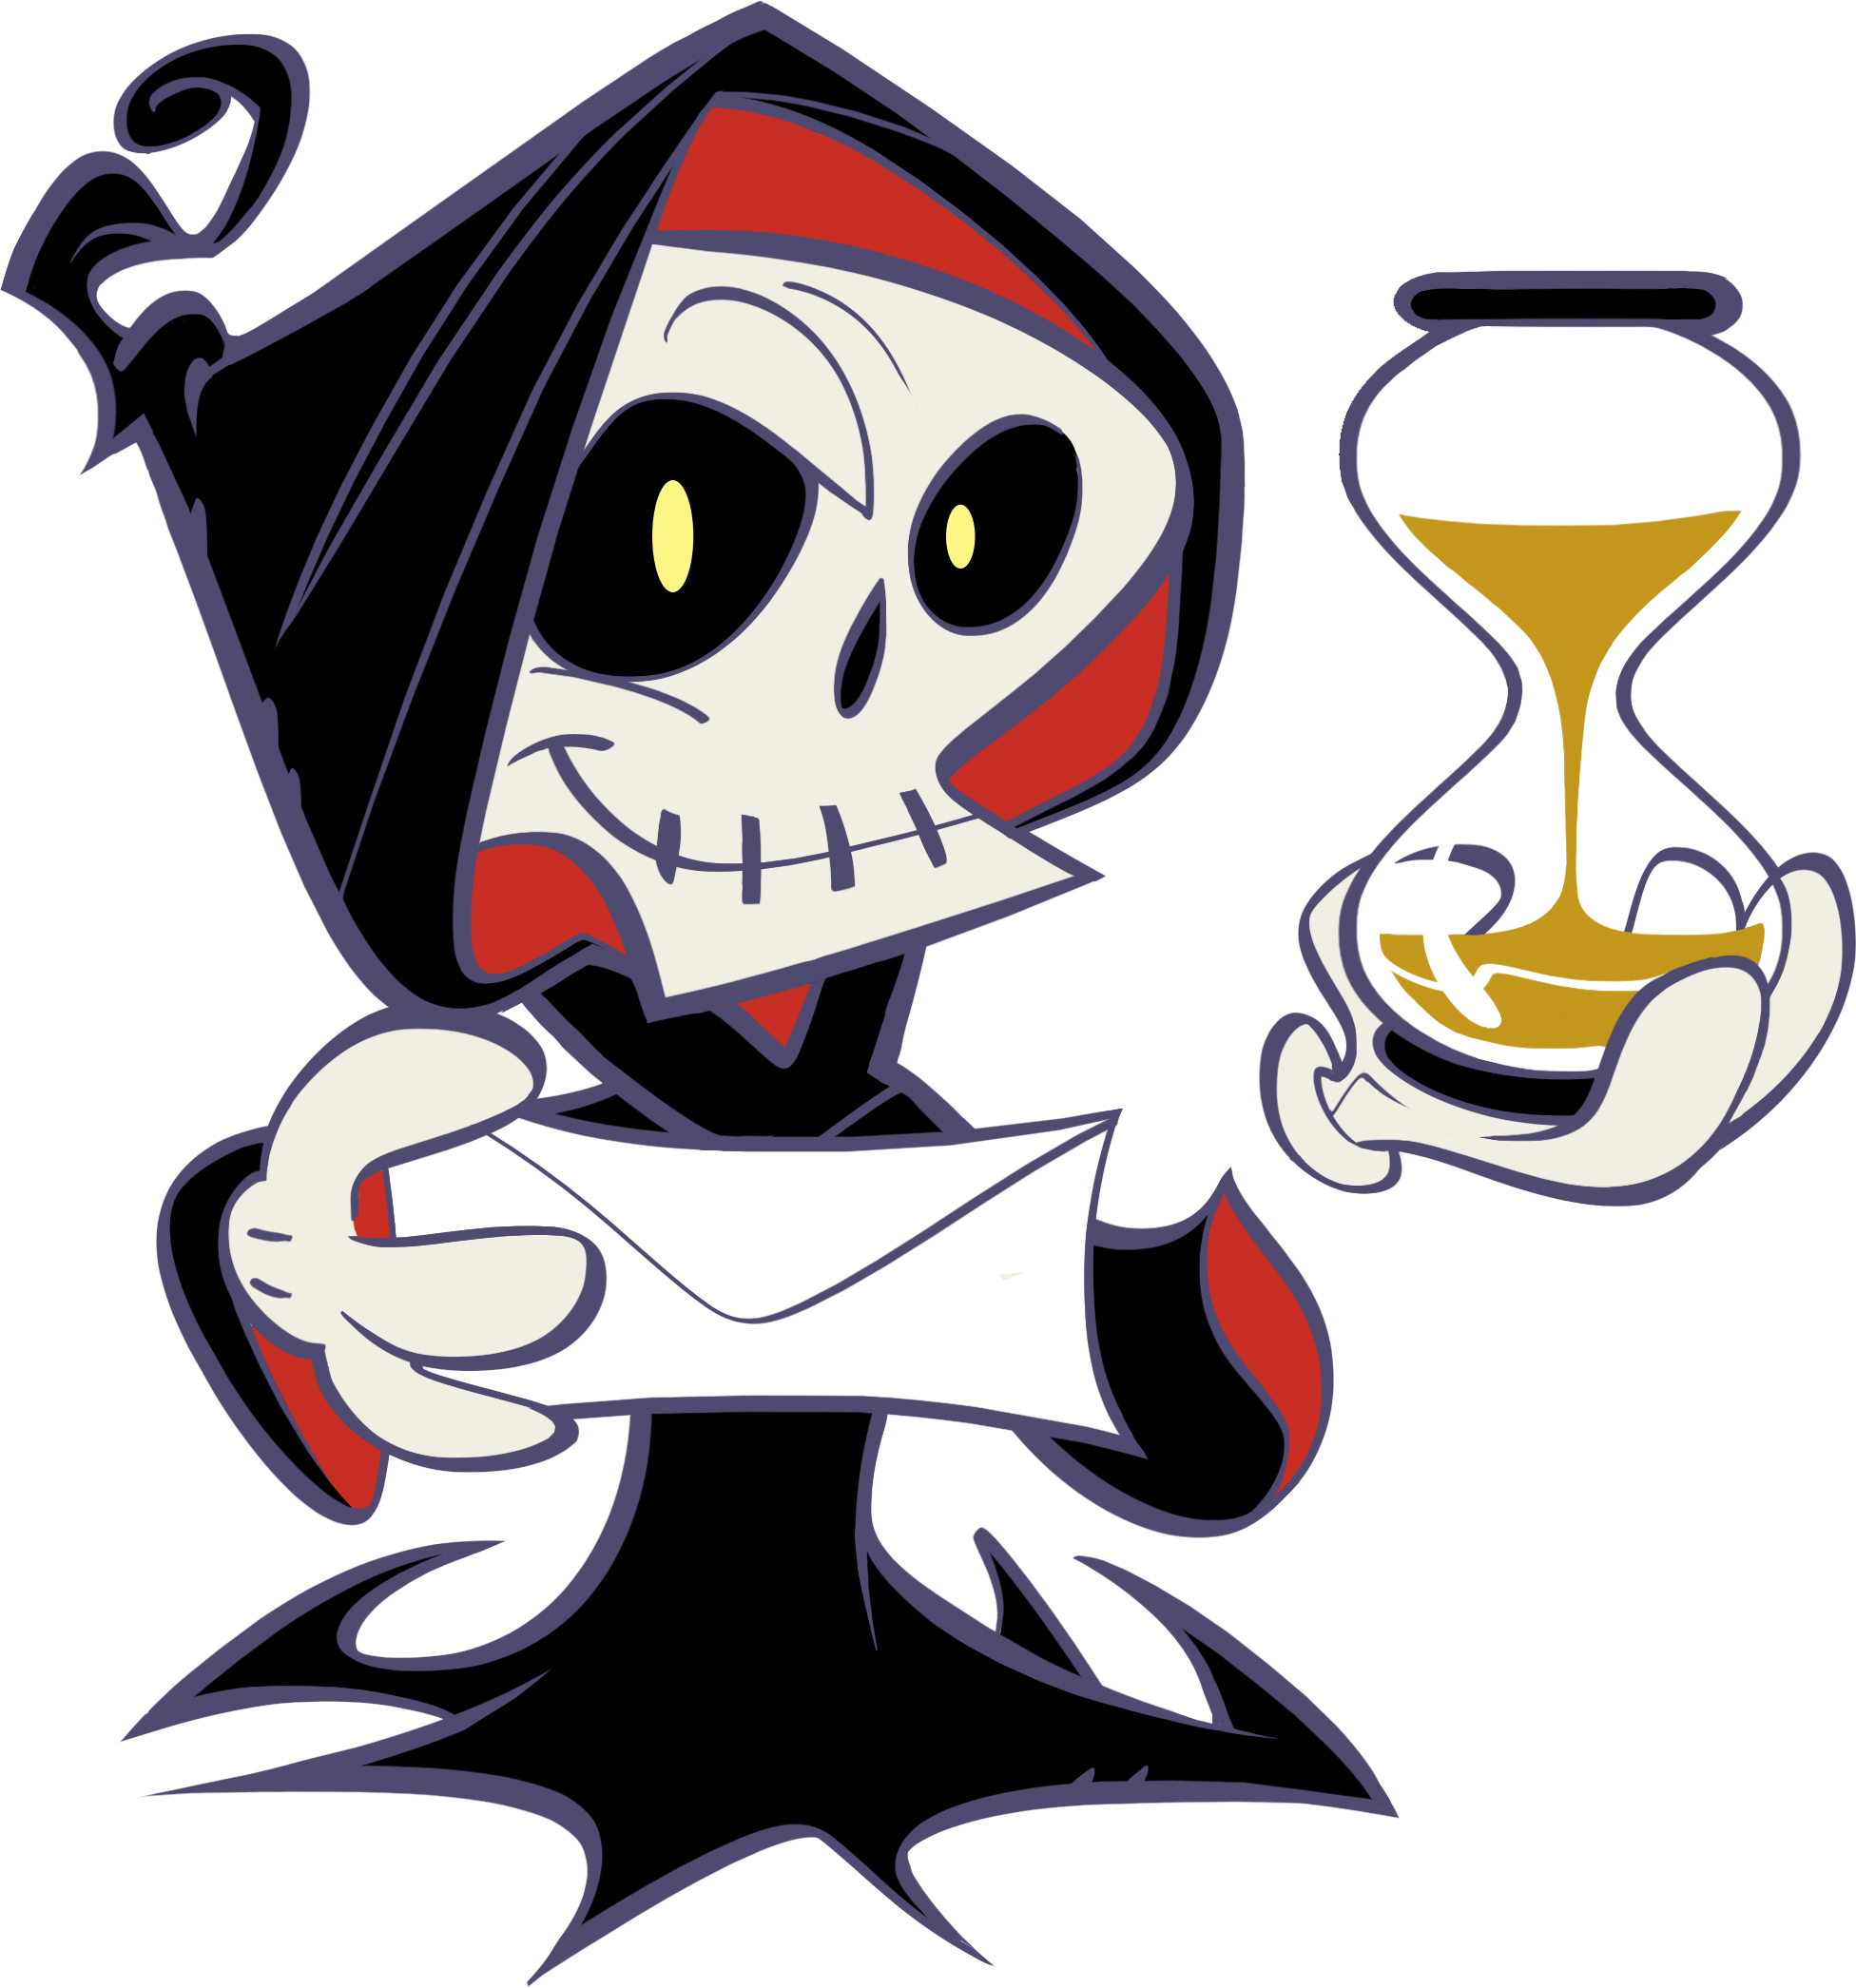 Grim reaper clipart stock photo. How far away from